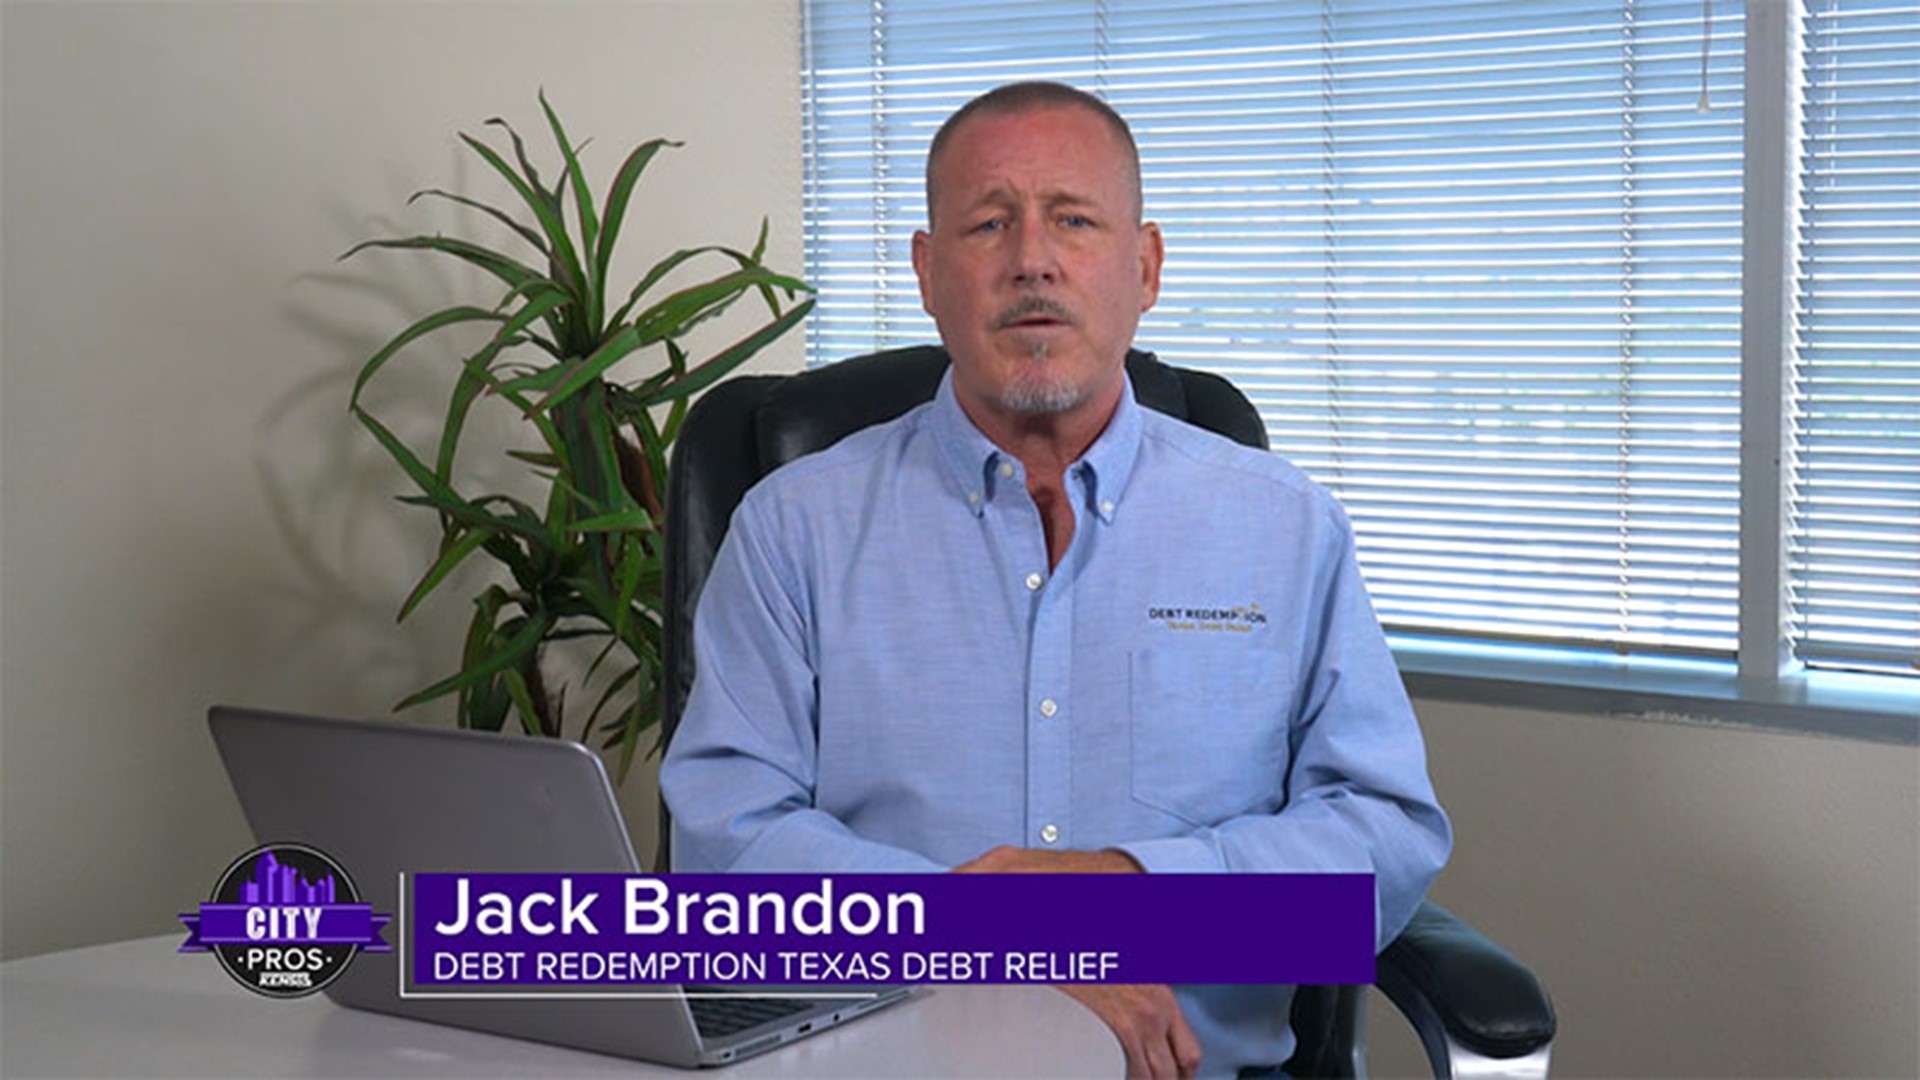 Debt Redemption Texas Debt Relief can help you find ways to reduce the burden of credit card payments.